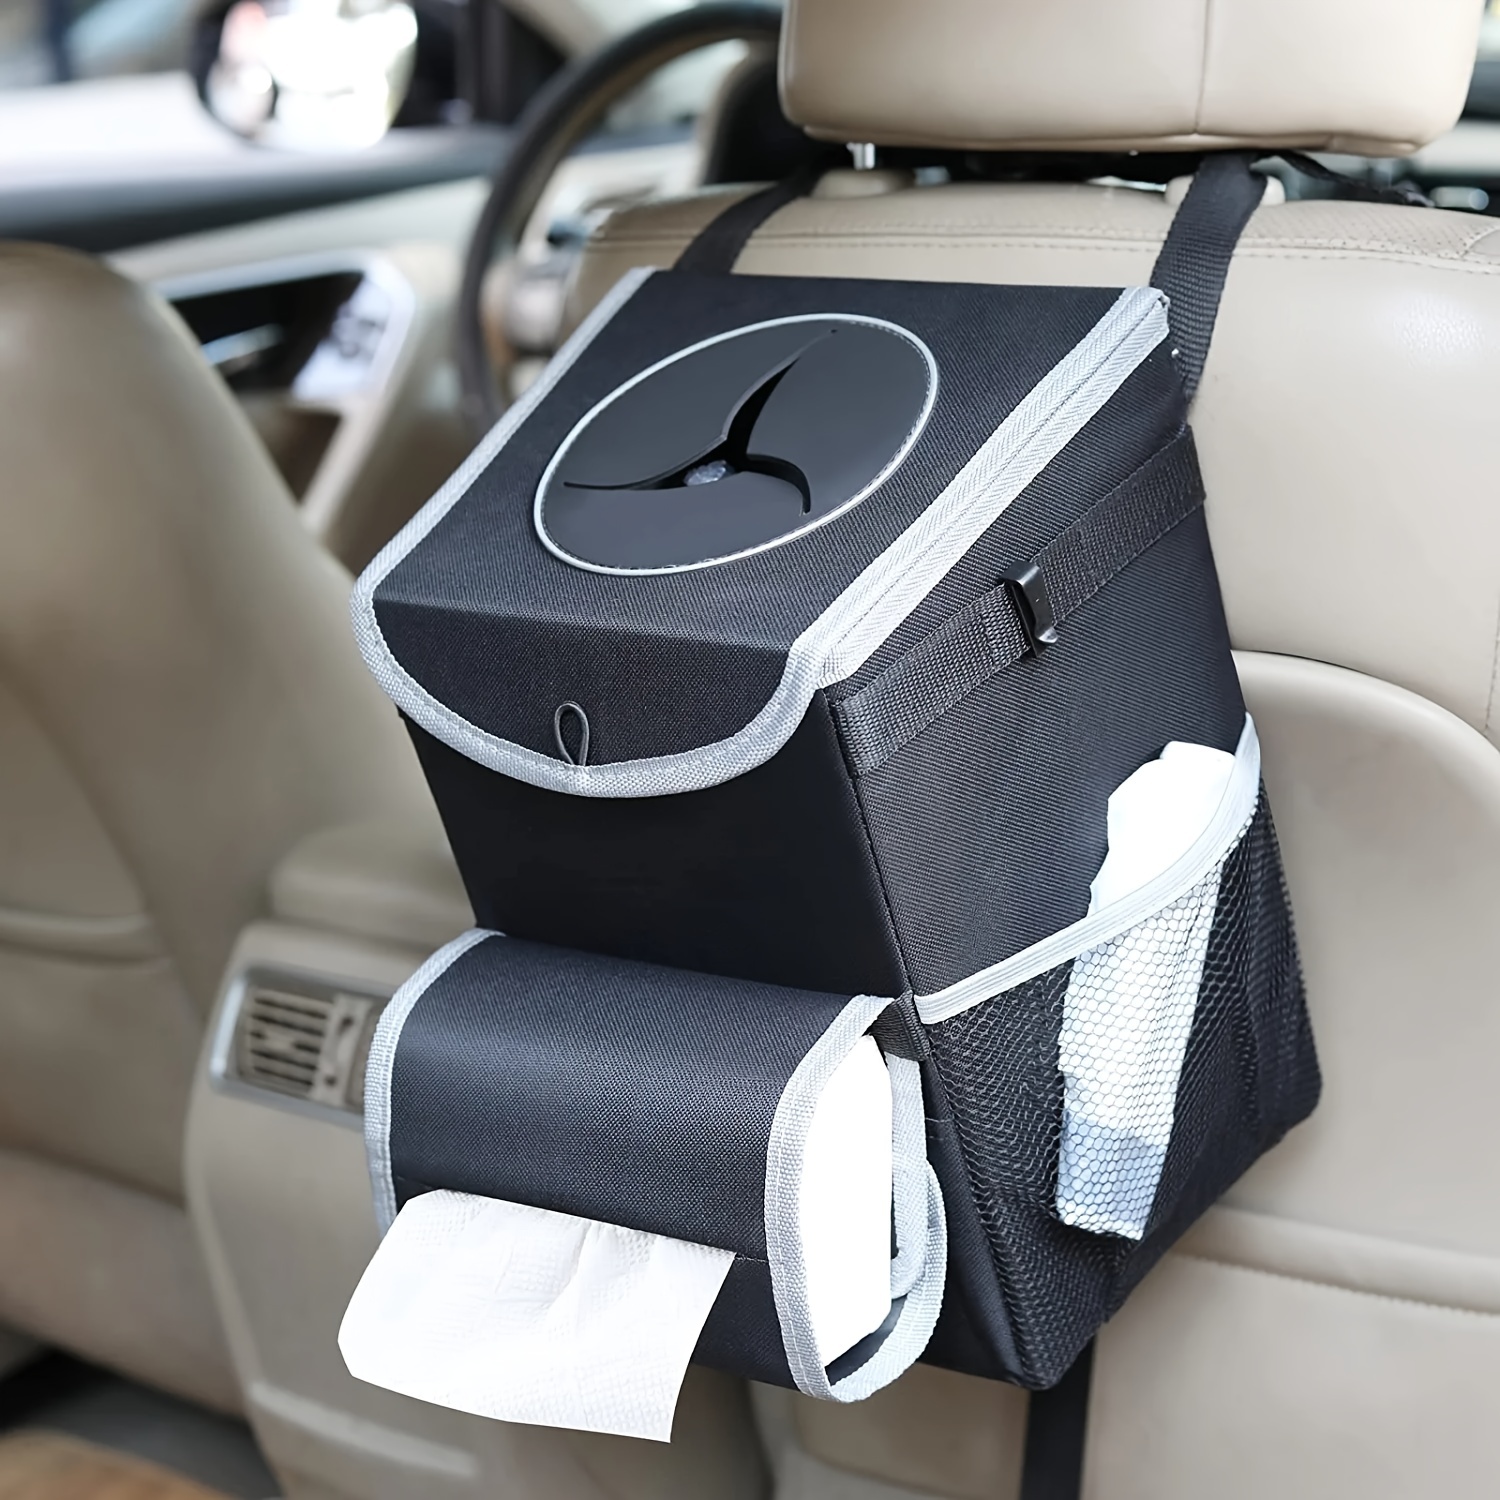 100% Leak-Proof Car Trash Can With Lid, Storage Pockets, Removable Liner,  and Wet Wipe Holder - Perfect for Car Cleaning!